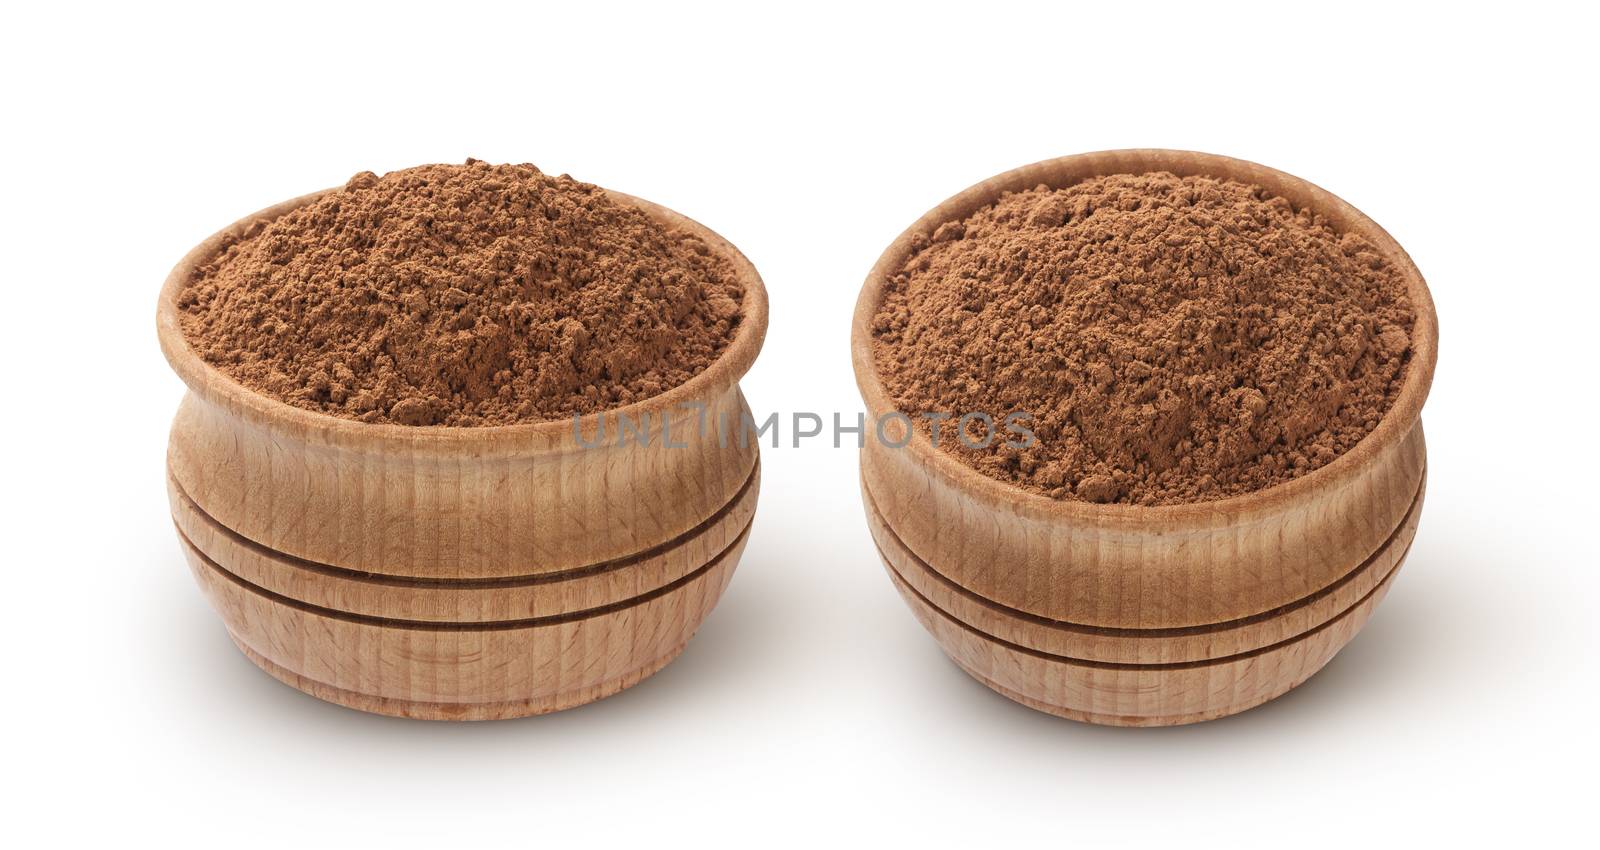 Cocoa powder in wooden bowl isolated on white background